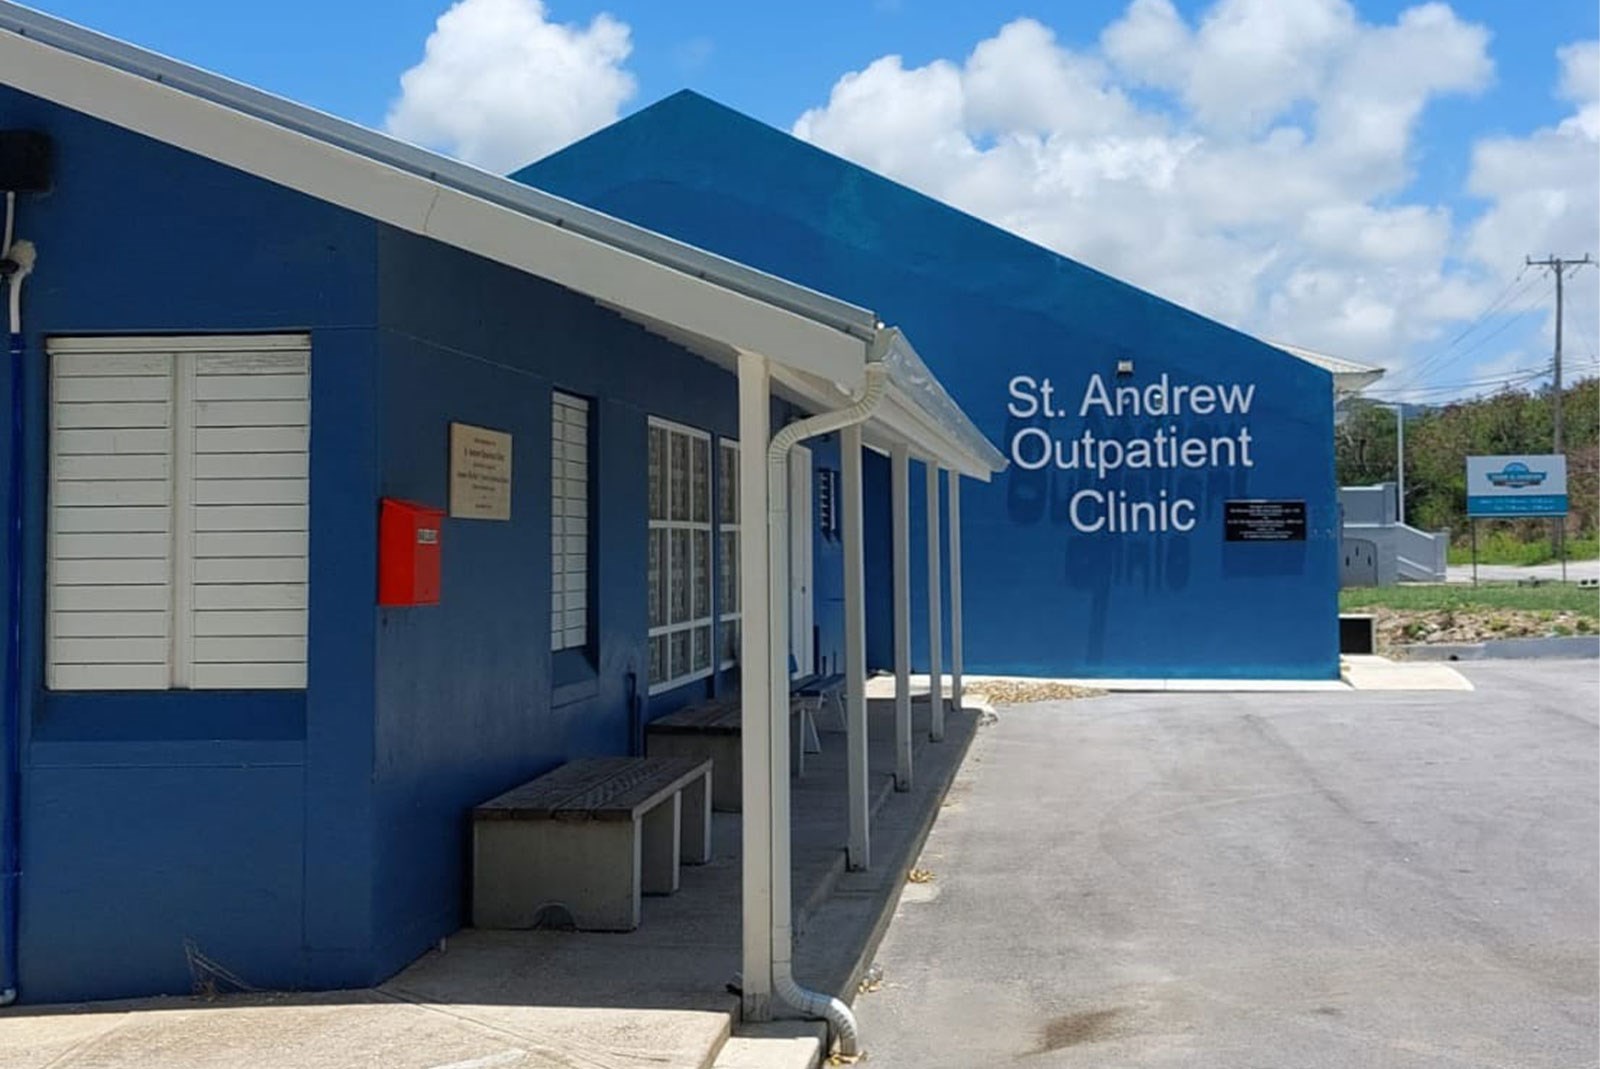 St. Andrew Outpatient Clinic